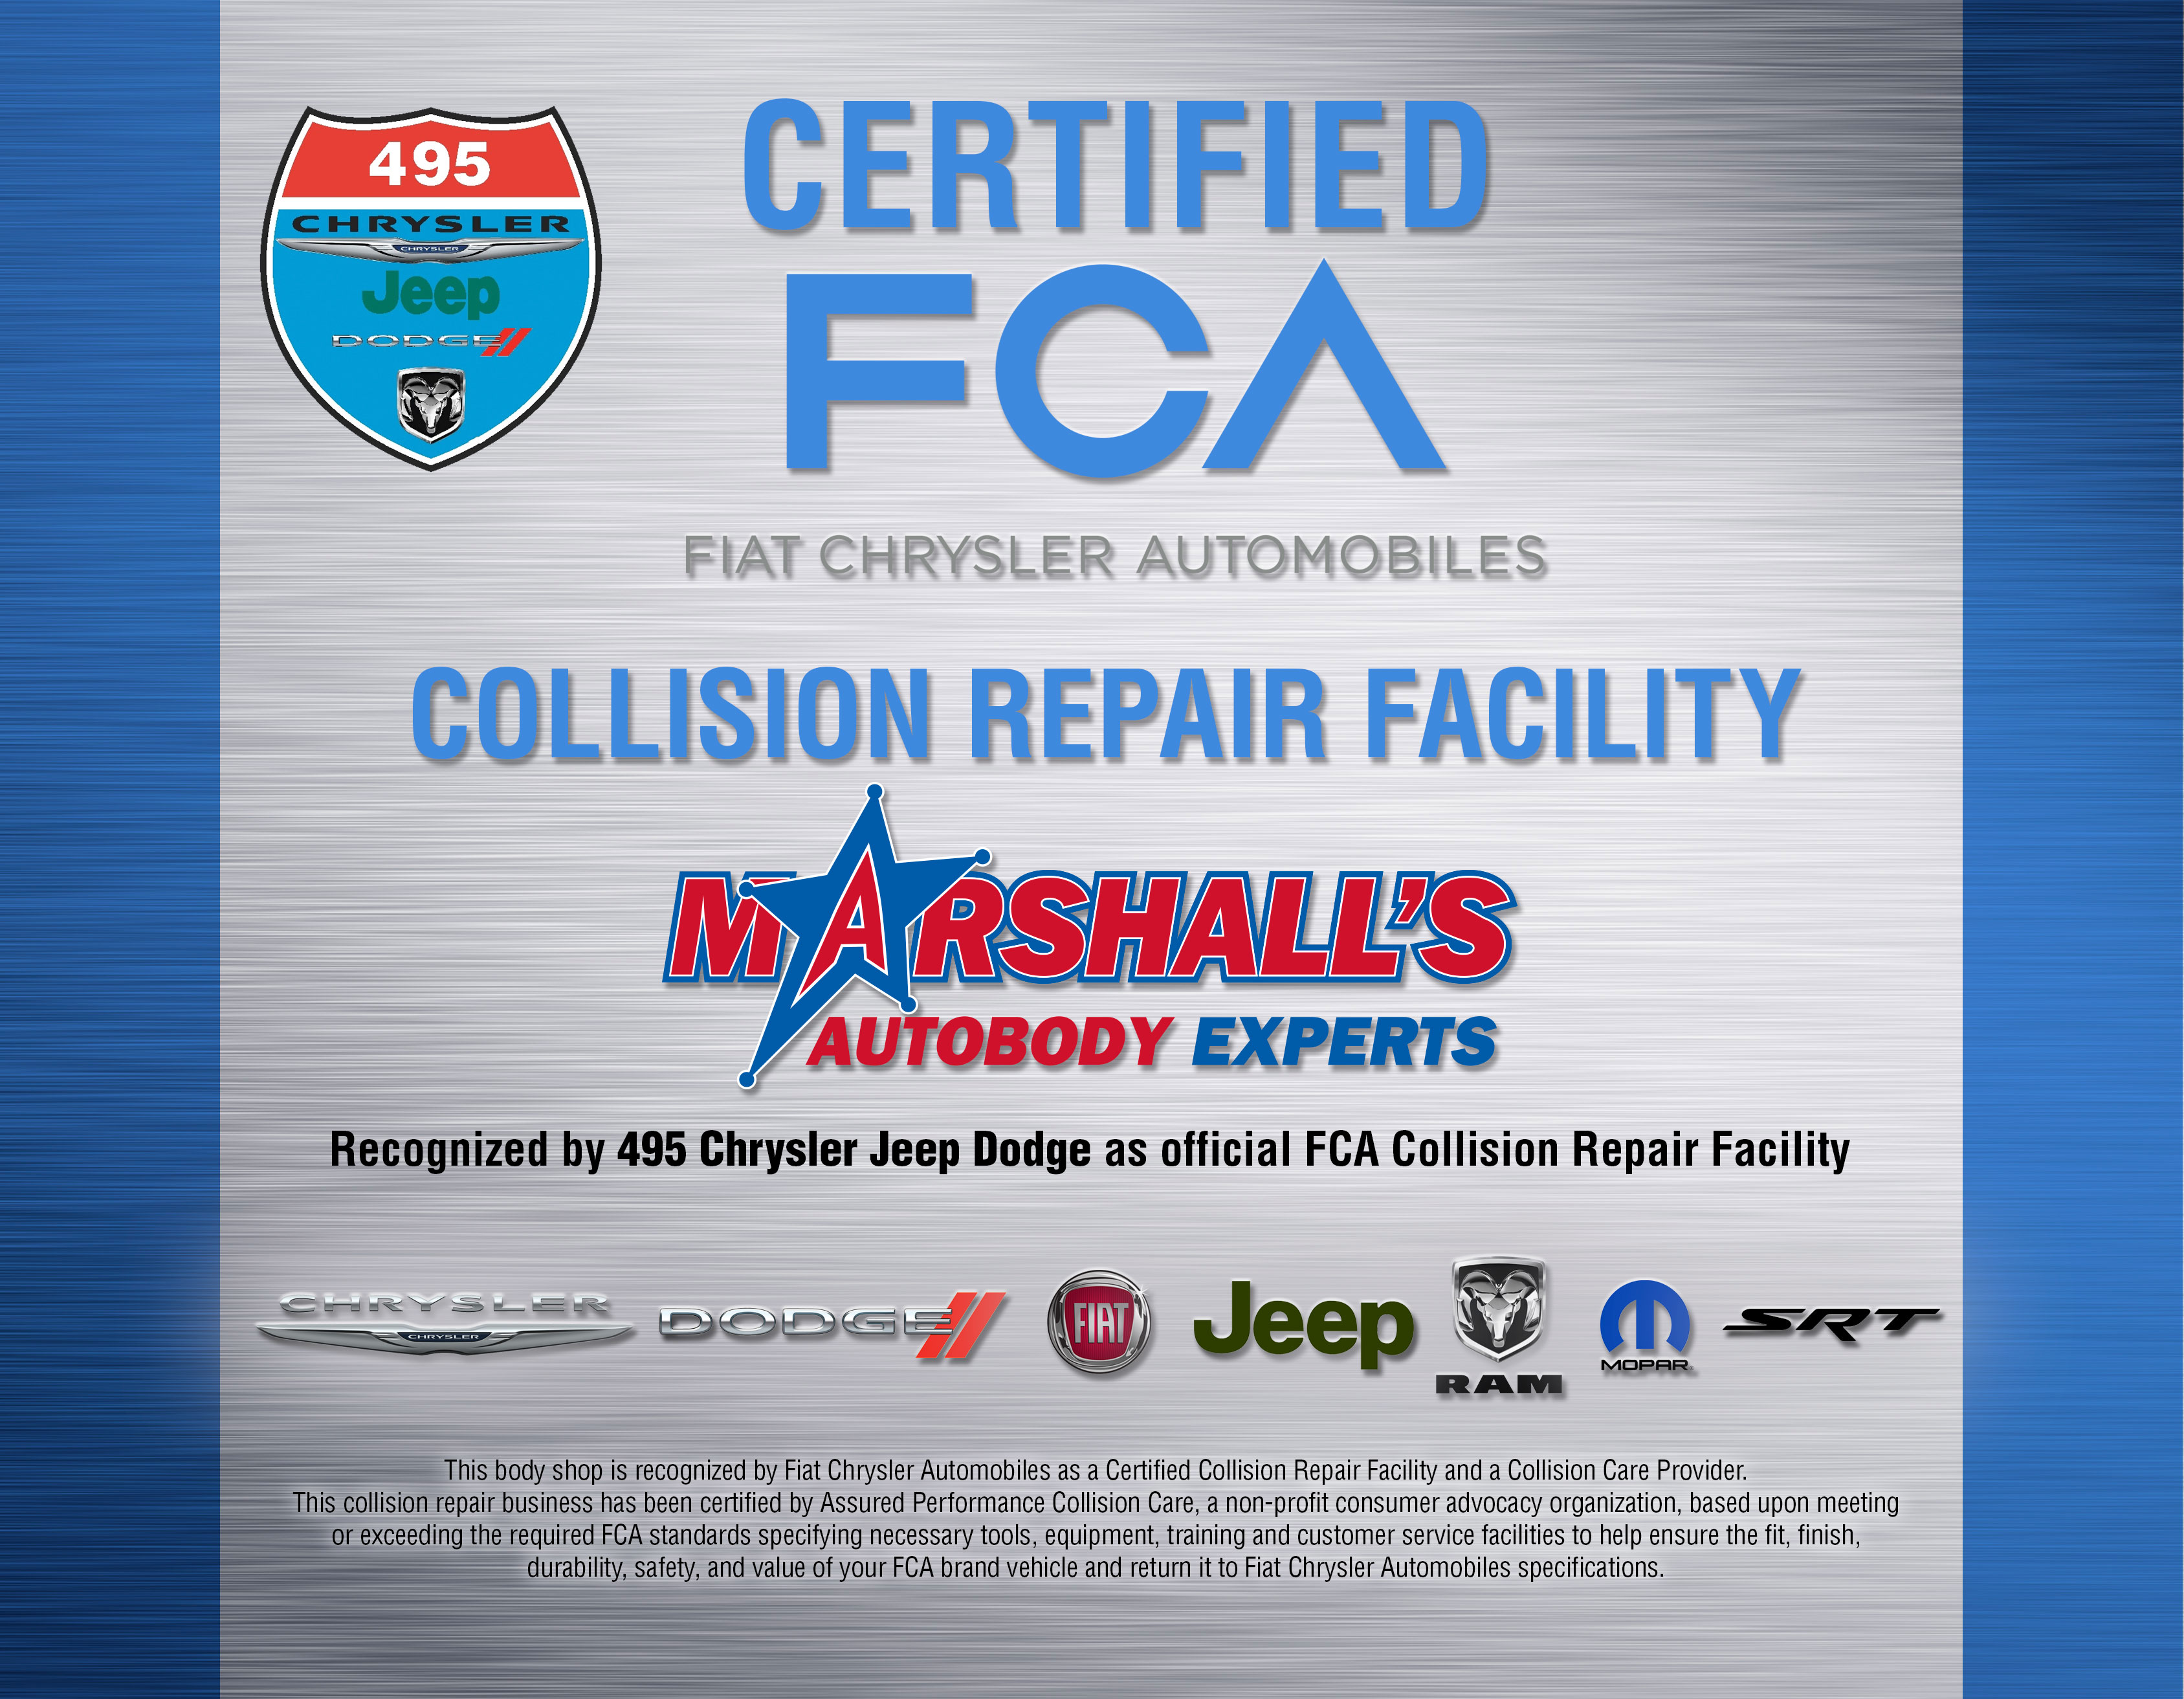 Certified FCA Collision Repair Facility